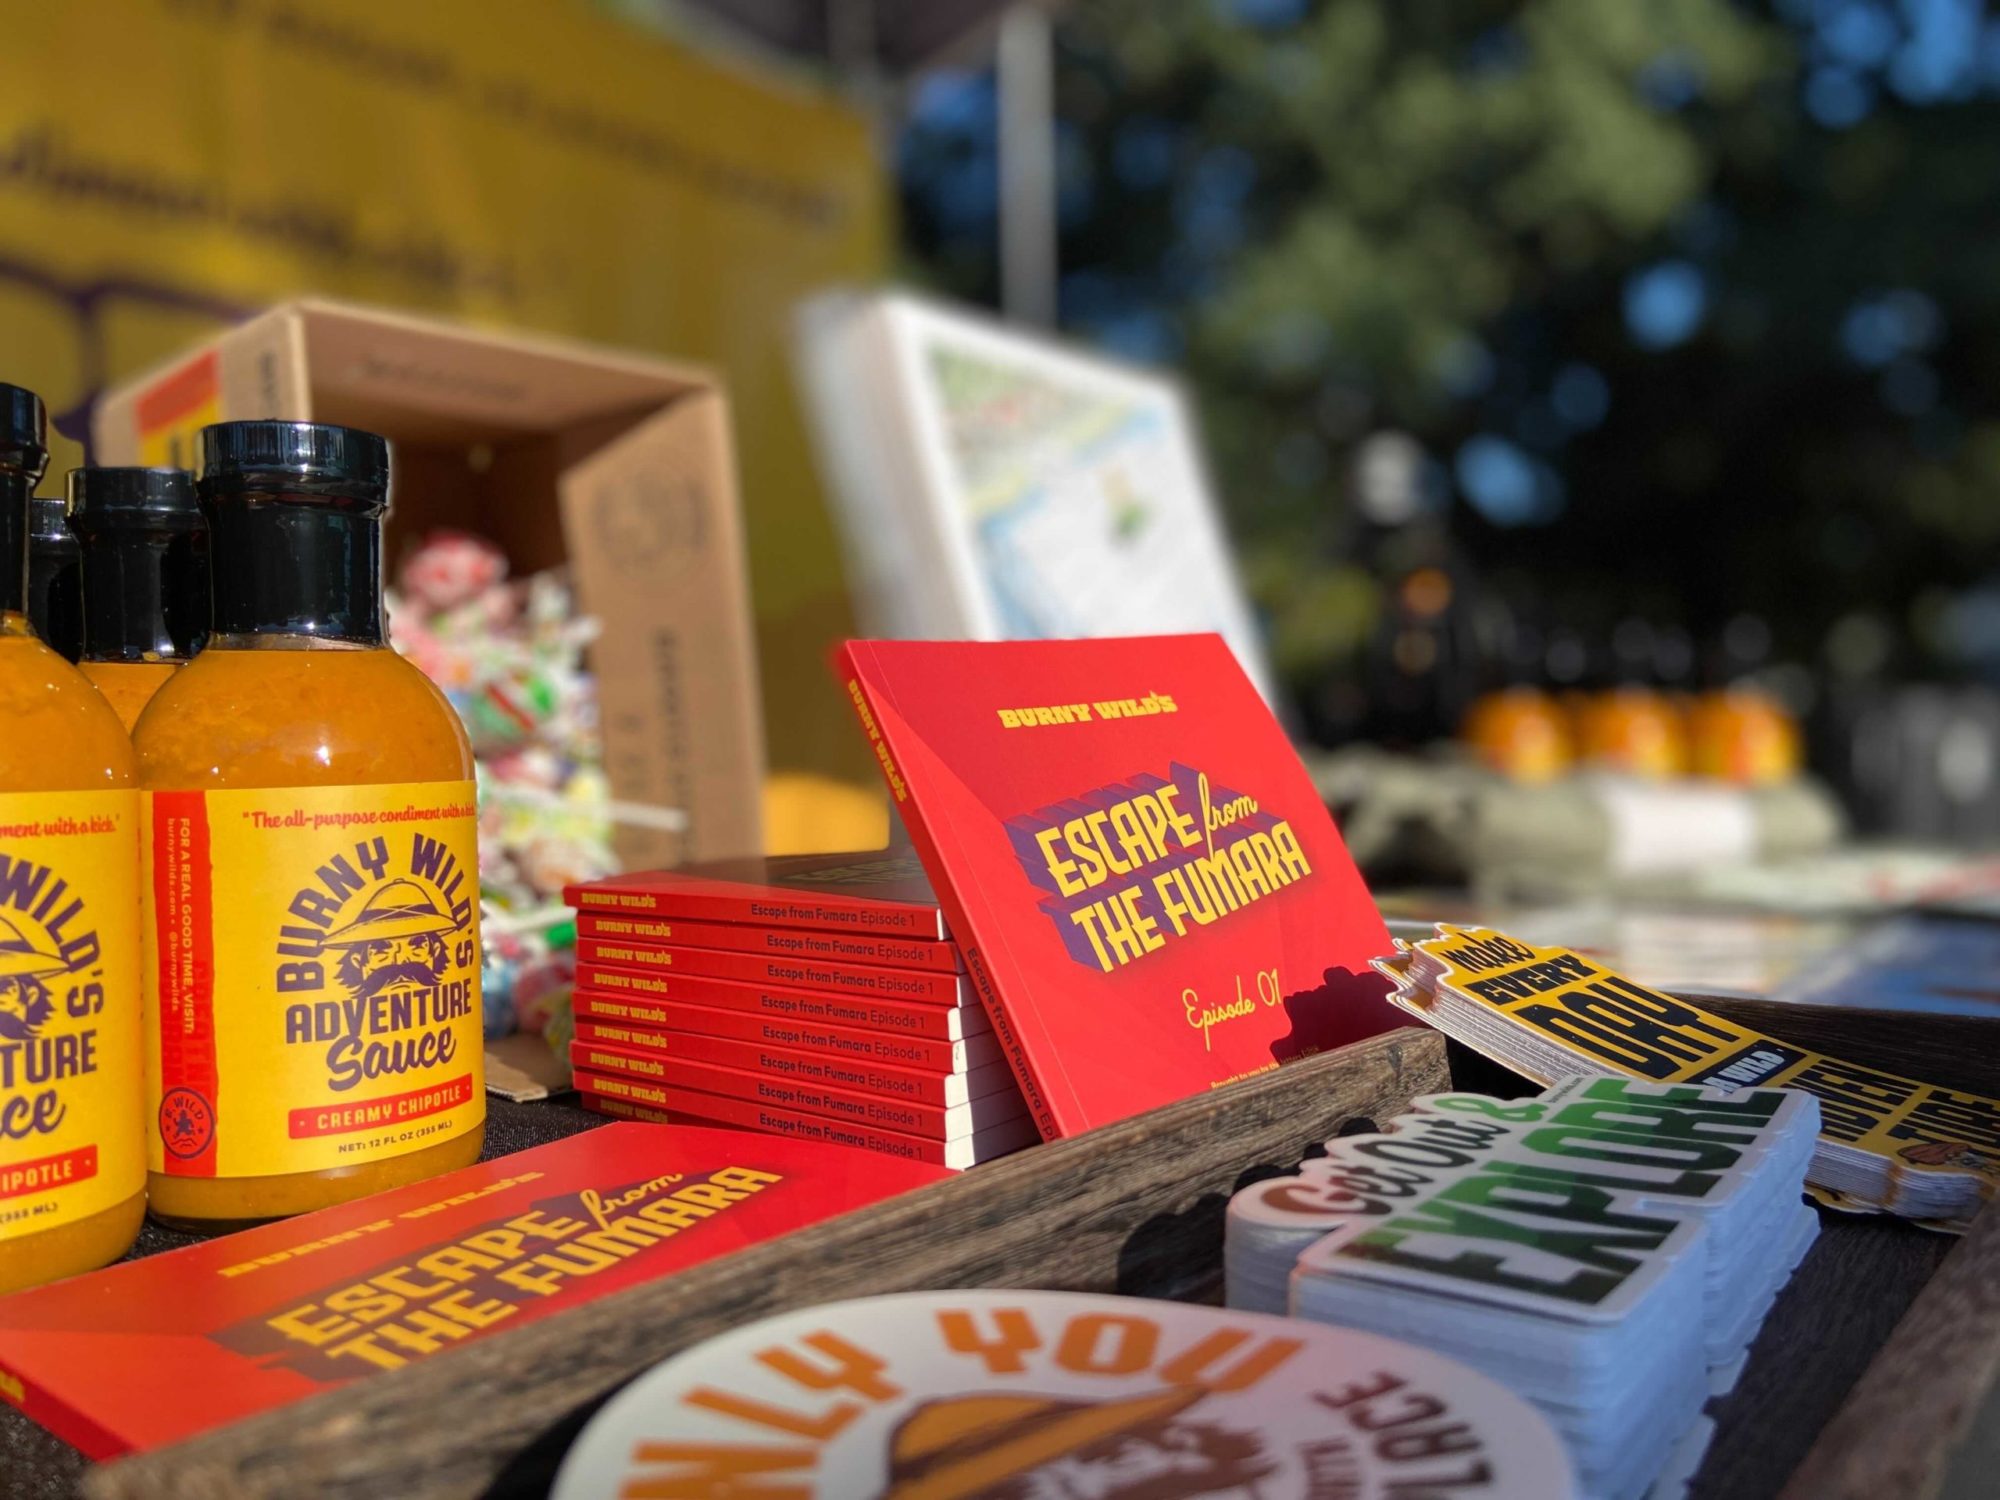 Stack of Comic Books | Burny Wild's Adventure Sauce at the Raleigh Night Market in Downtown Raleigh, NC